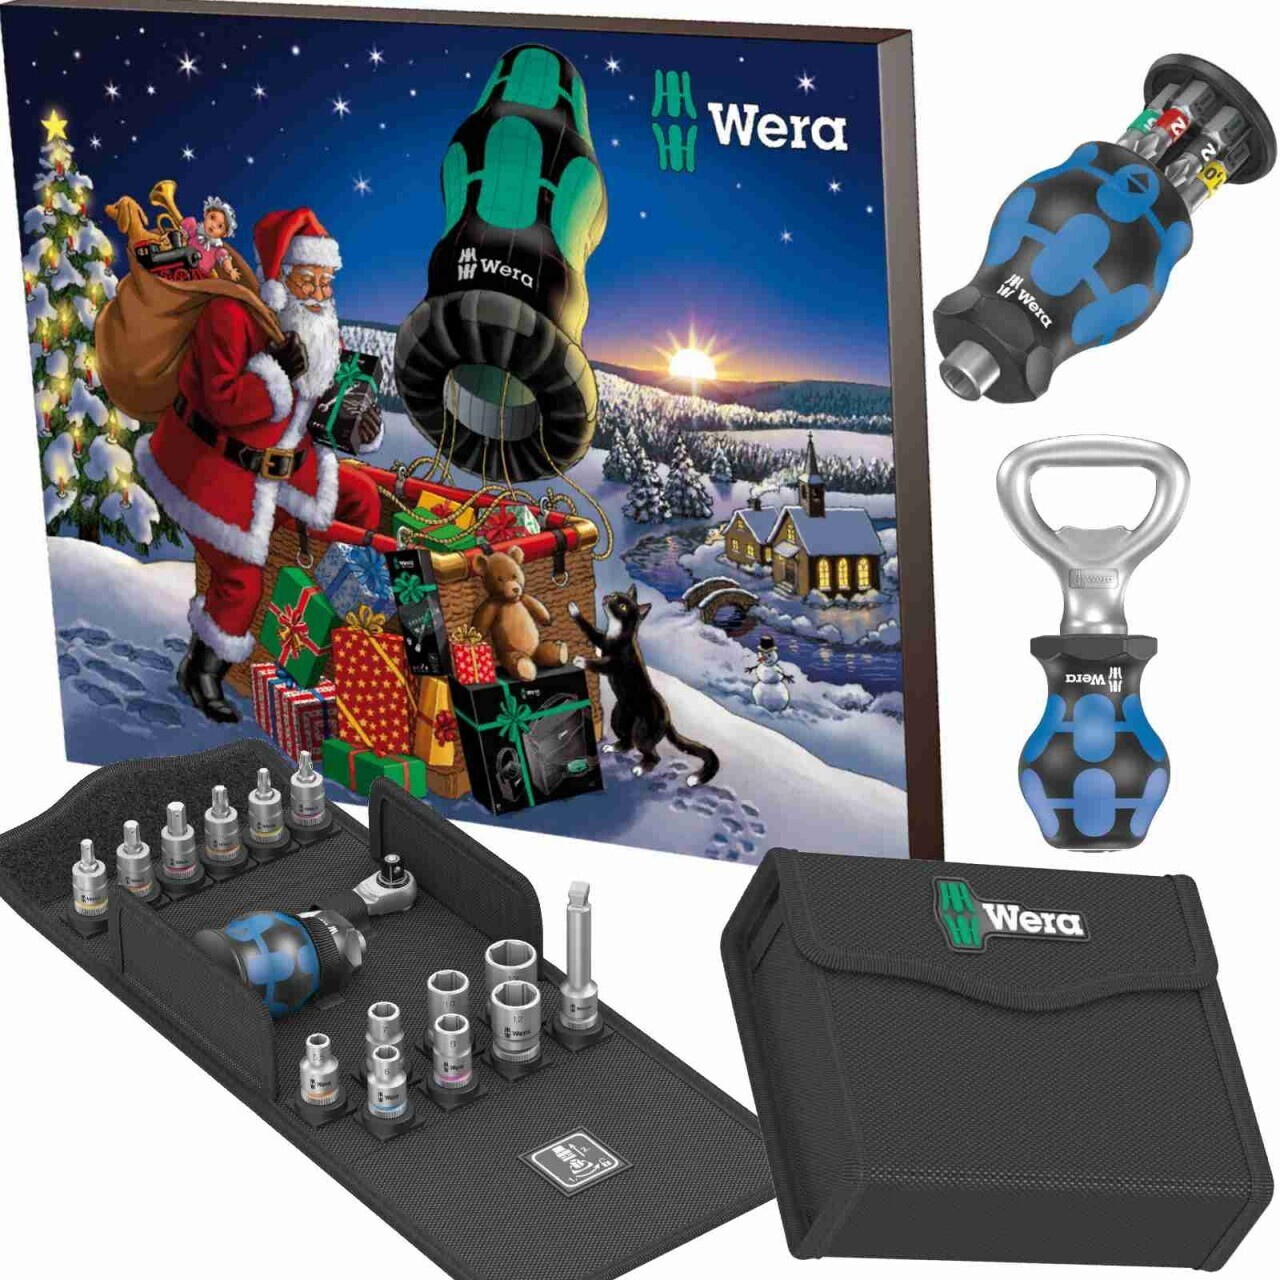 Buy Wera Advent Calendar 2020 from £57.95 (Today) Best Deals on